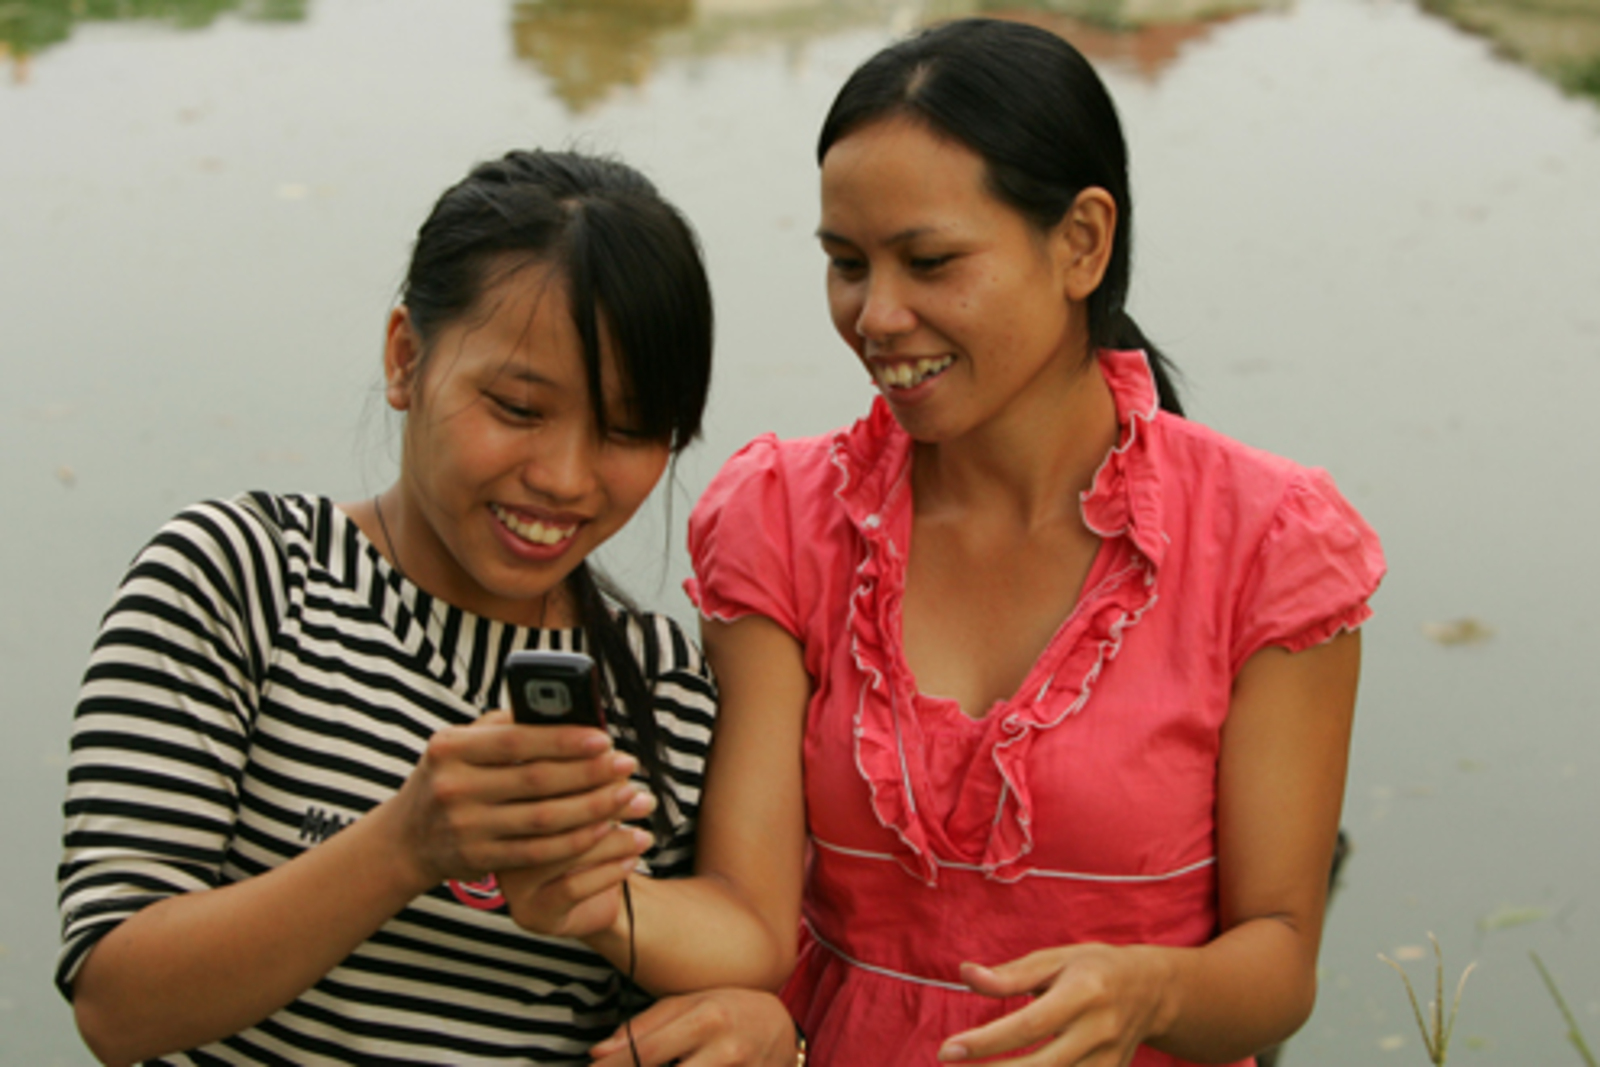 Vietnamese youth on their phone